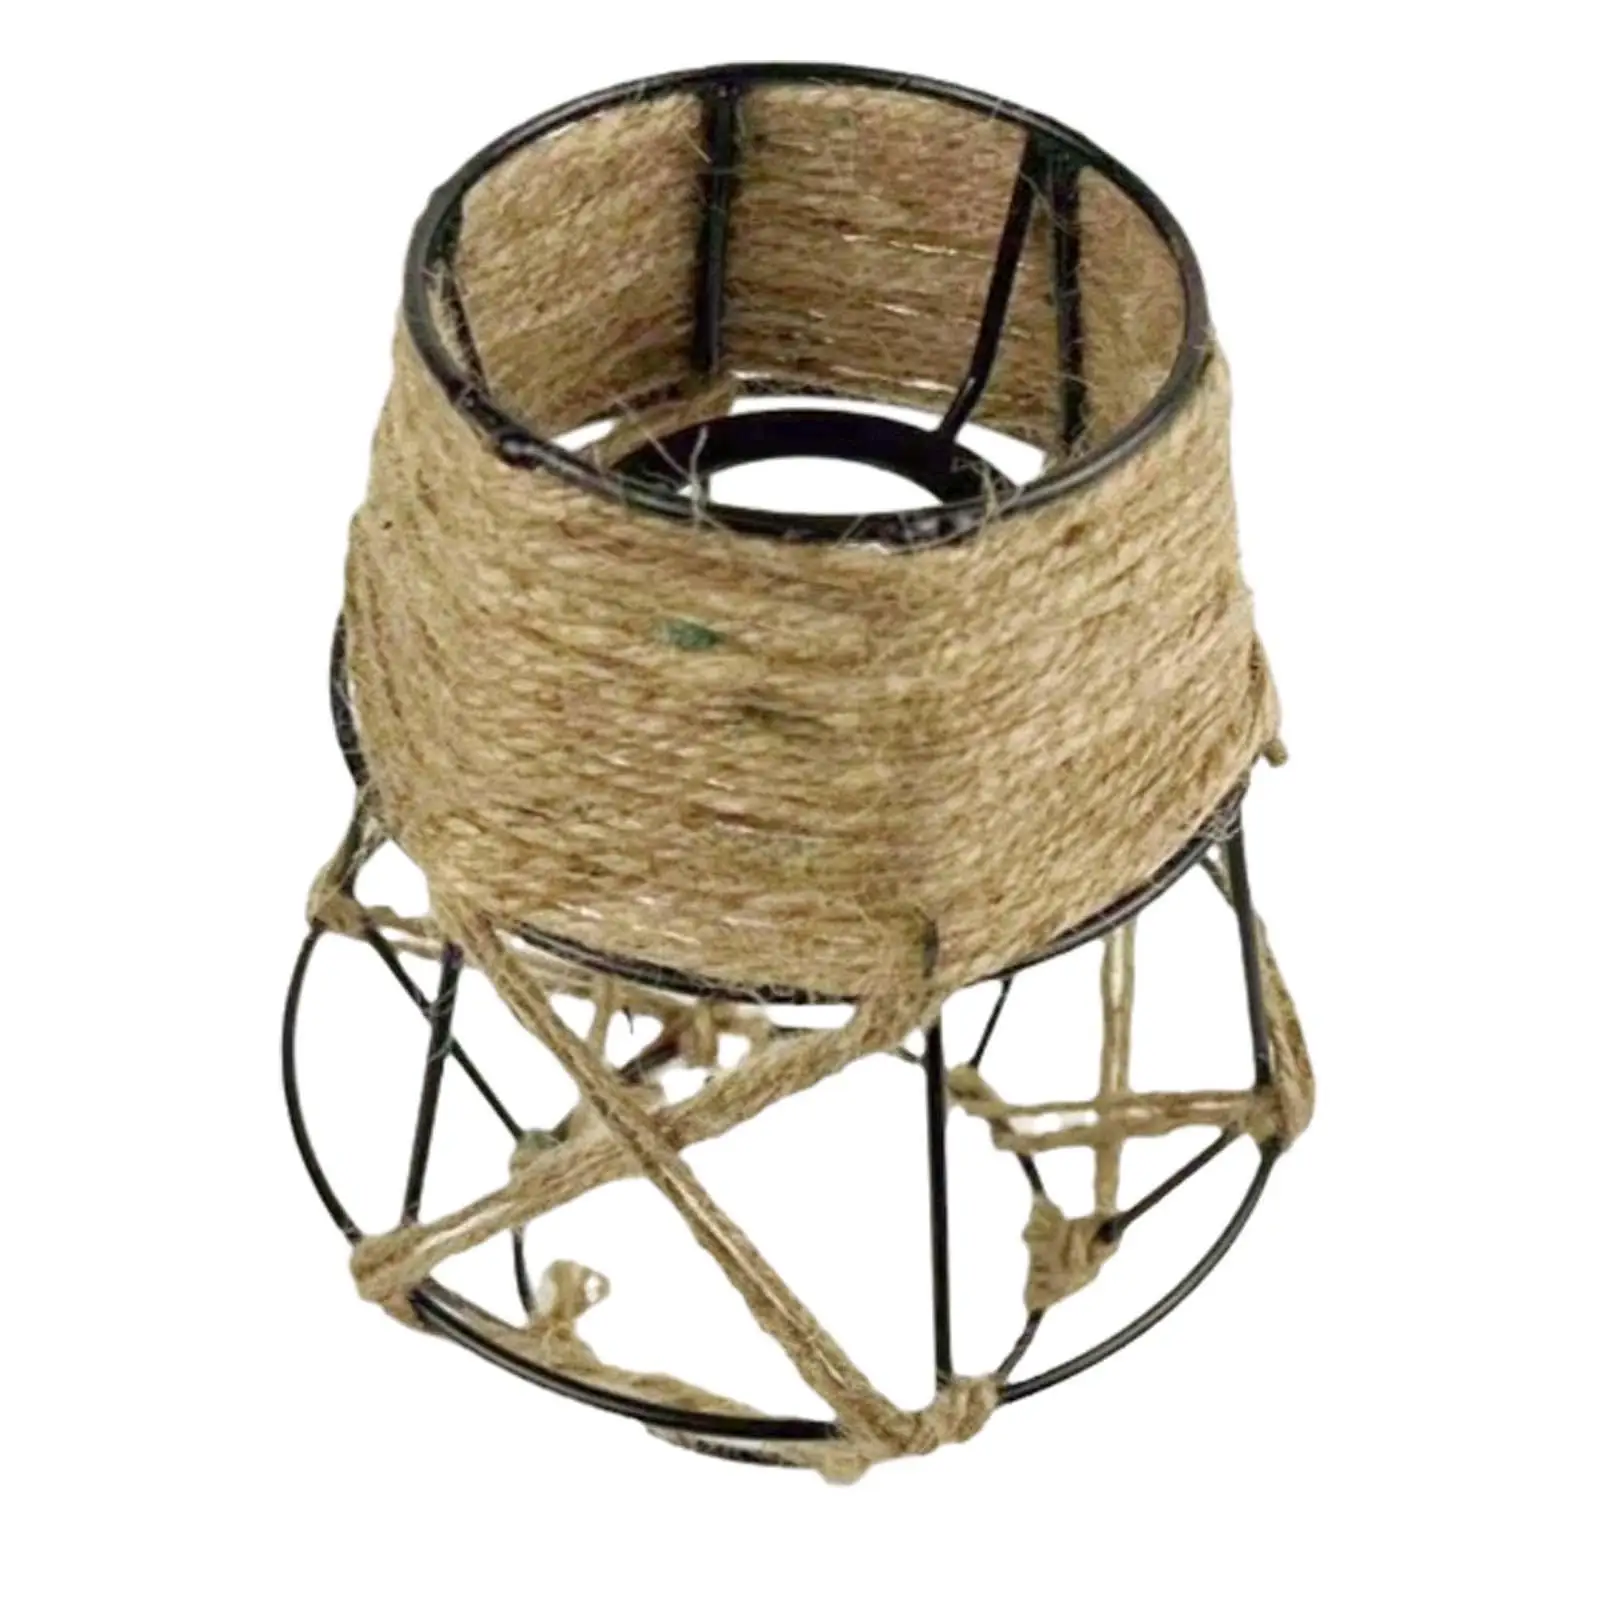 Woven Rope Lampshade Home Ceiling Light Fixture Cover Pendant Lamp Shade for Droplight Dining Room Bars Restaurant Reading Light